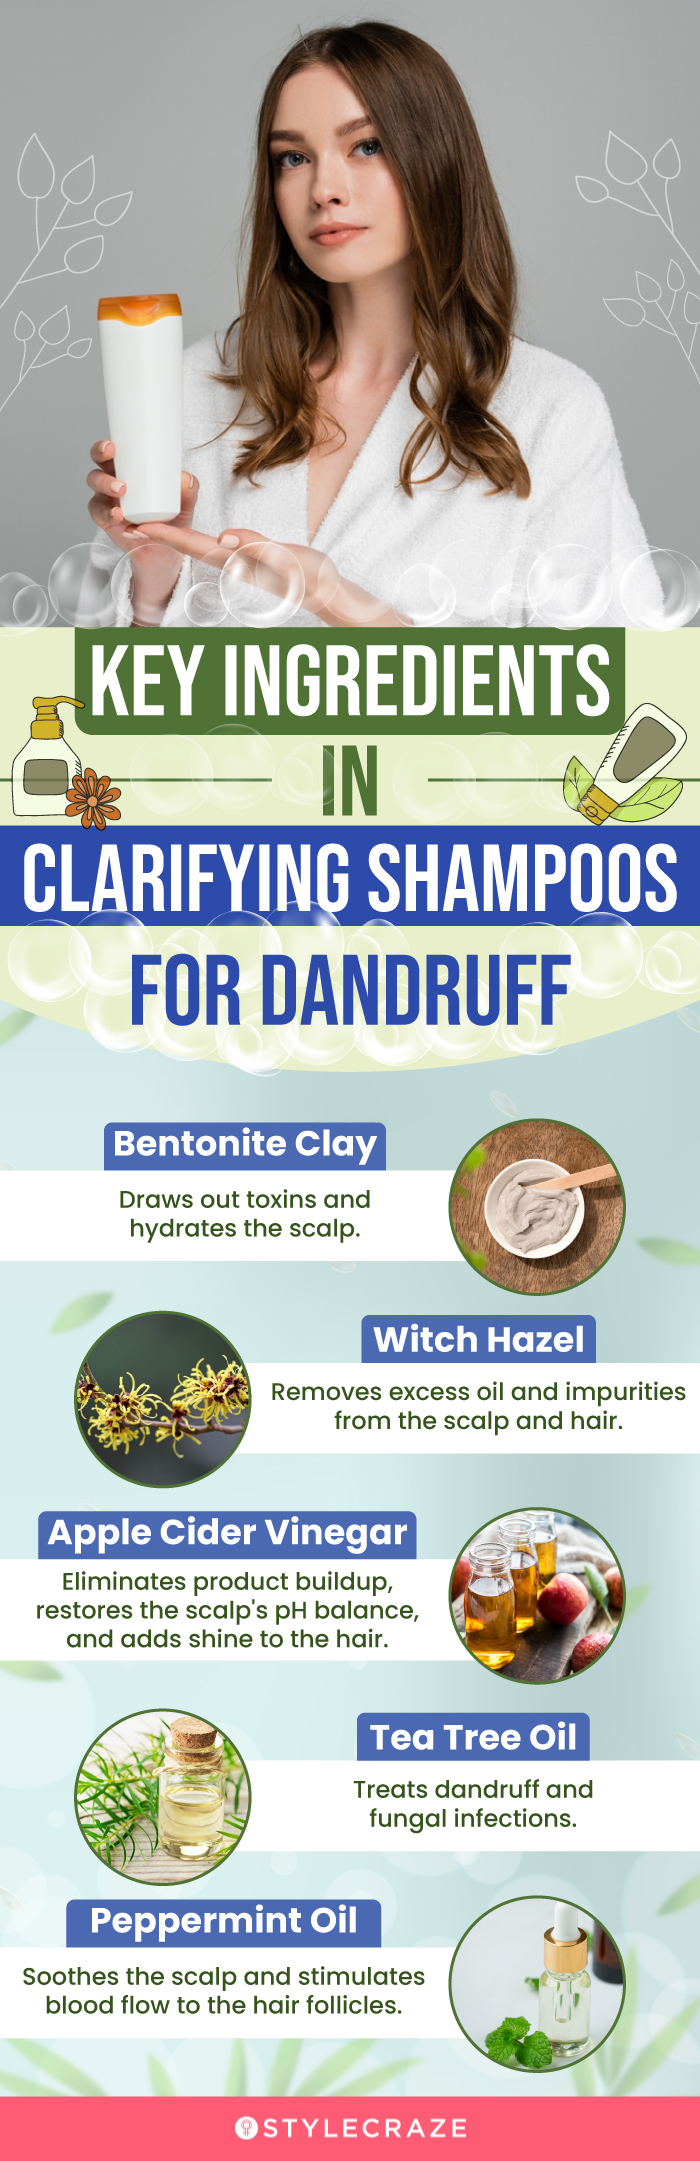 Key Ingredients In Clarifying Shampoos For Dandruff (infographic)